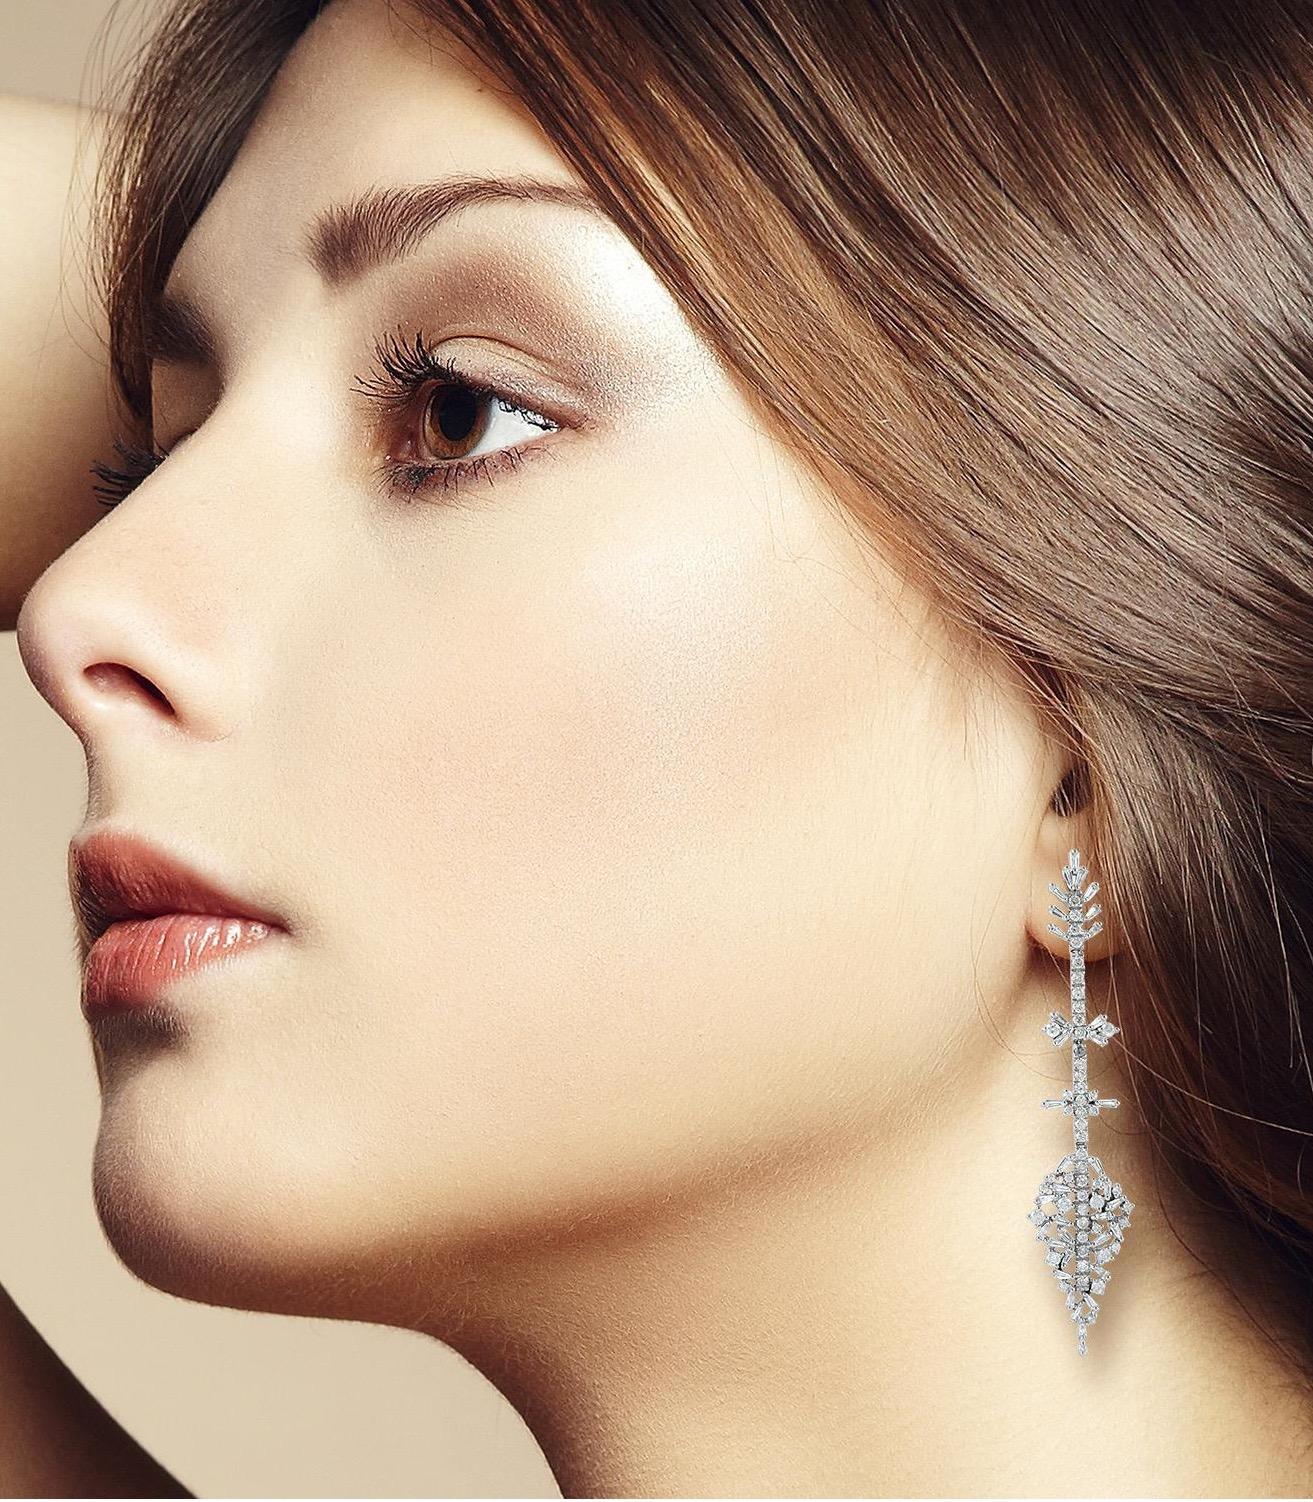 Handcrafted from 18-karat white gold, these stunning arrow drop earrings are set with 4.45 carats of glimmering baguette diamonds. 

FOLLOW  MEGHNA JEWELS storefront to view the latest collection & exclusive pieces.  Meghna Jewels is proudly rated